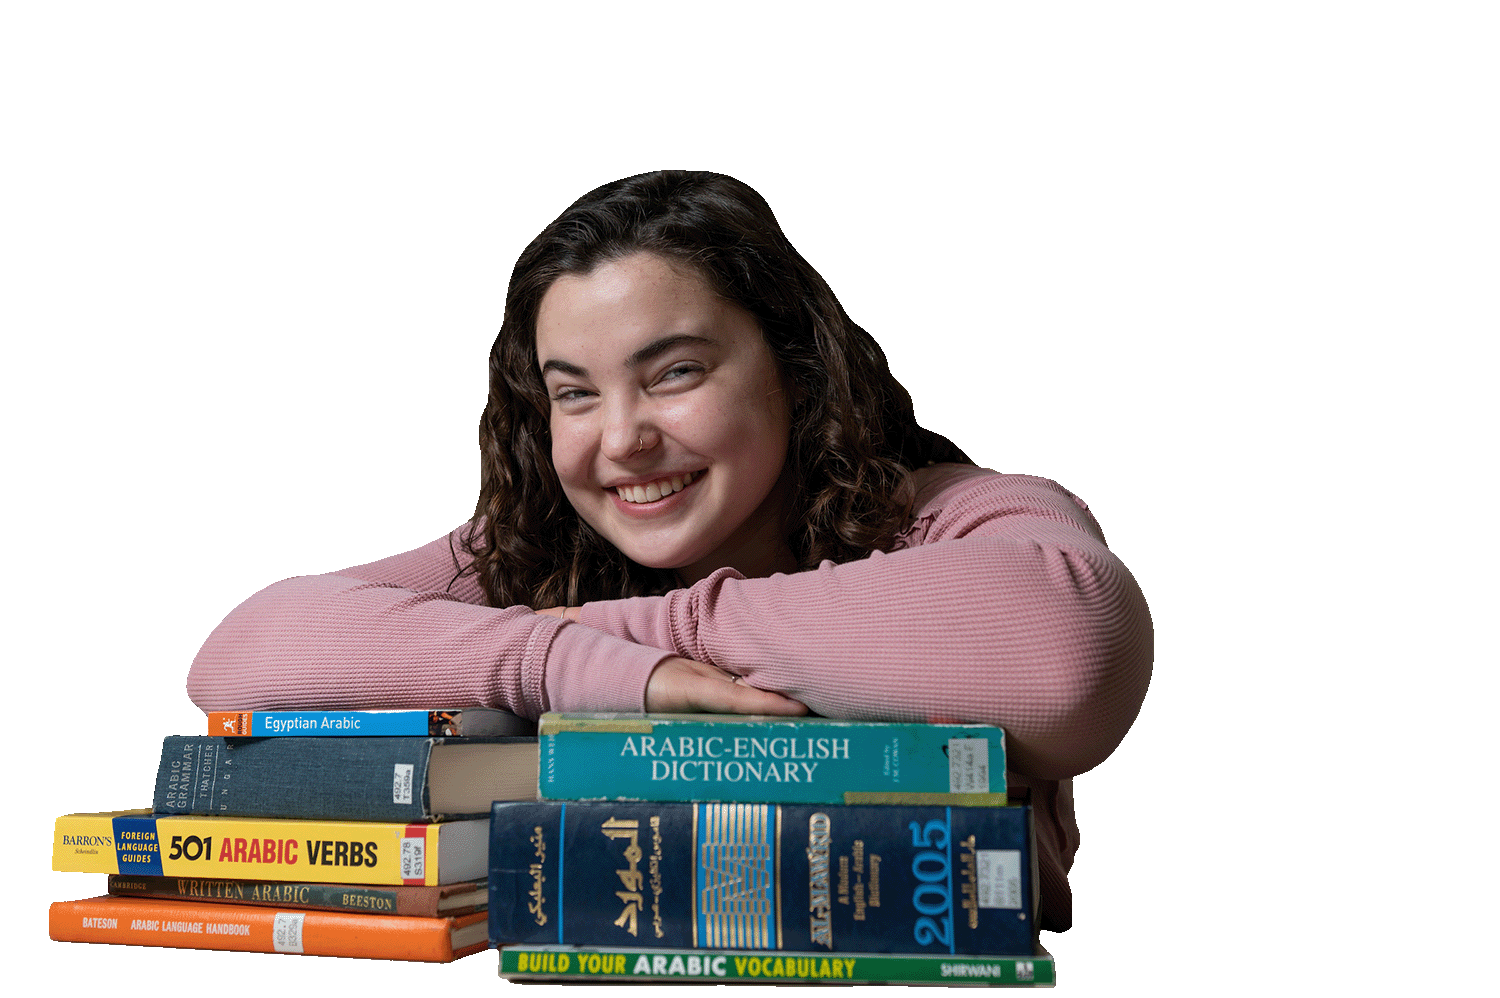 A student rests her arms on a stack of books and smiles